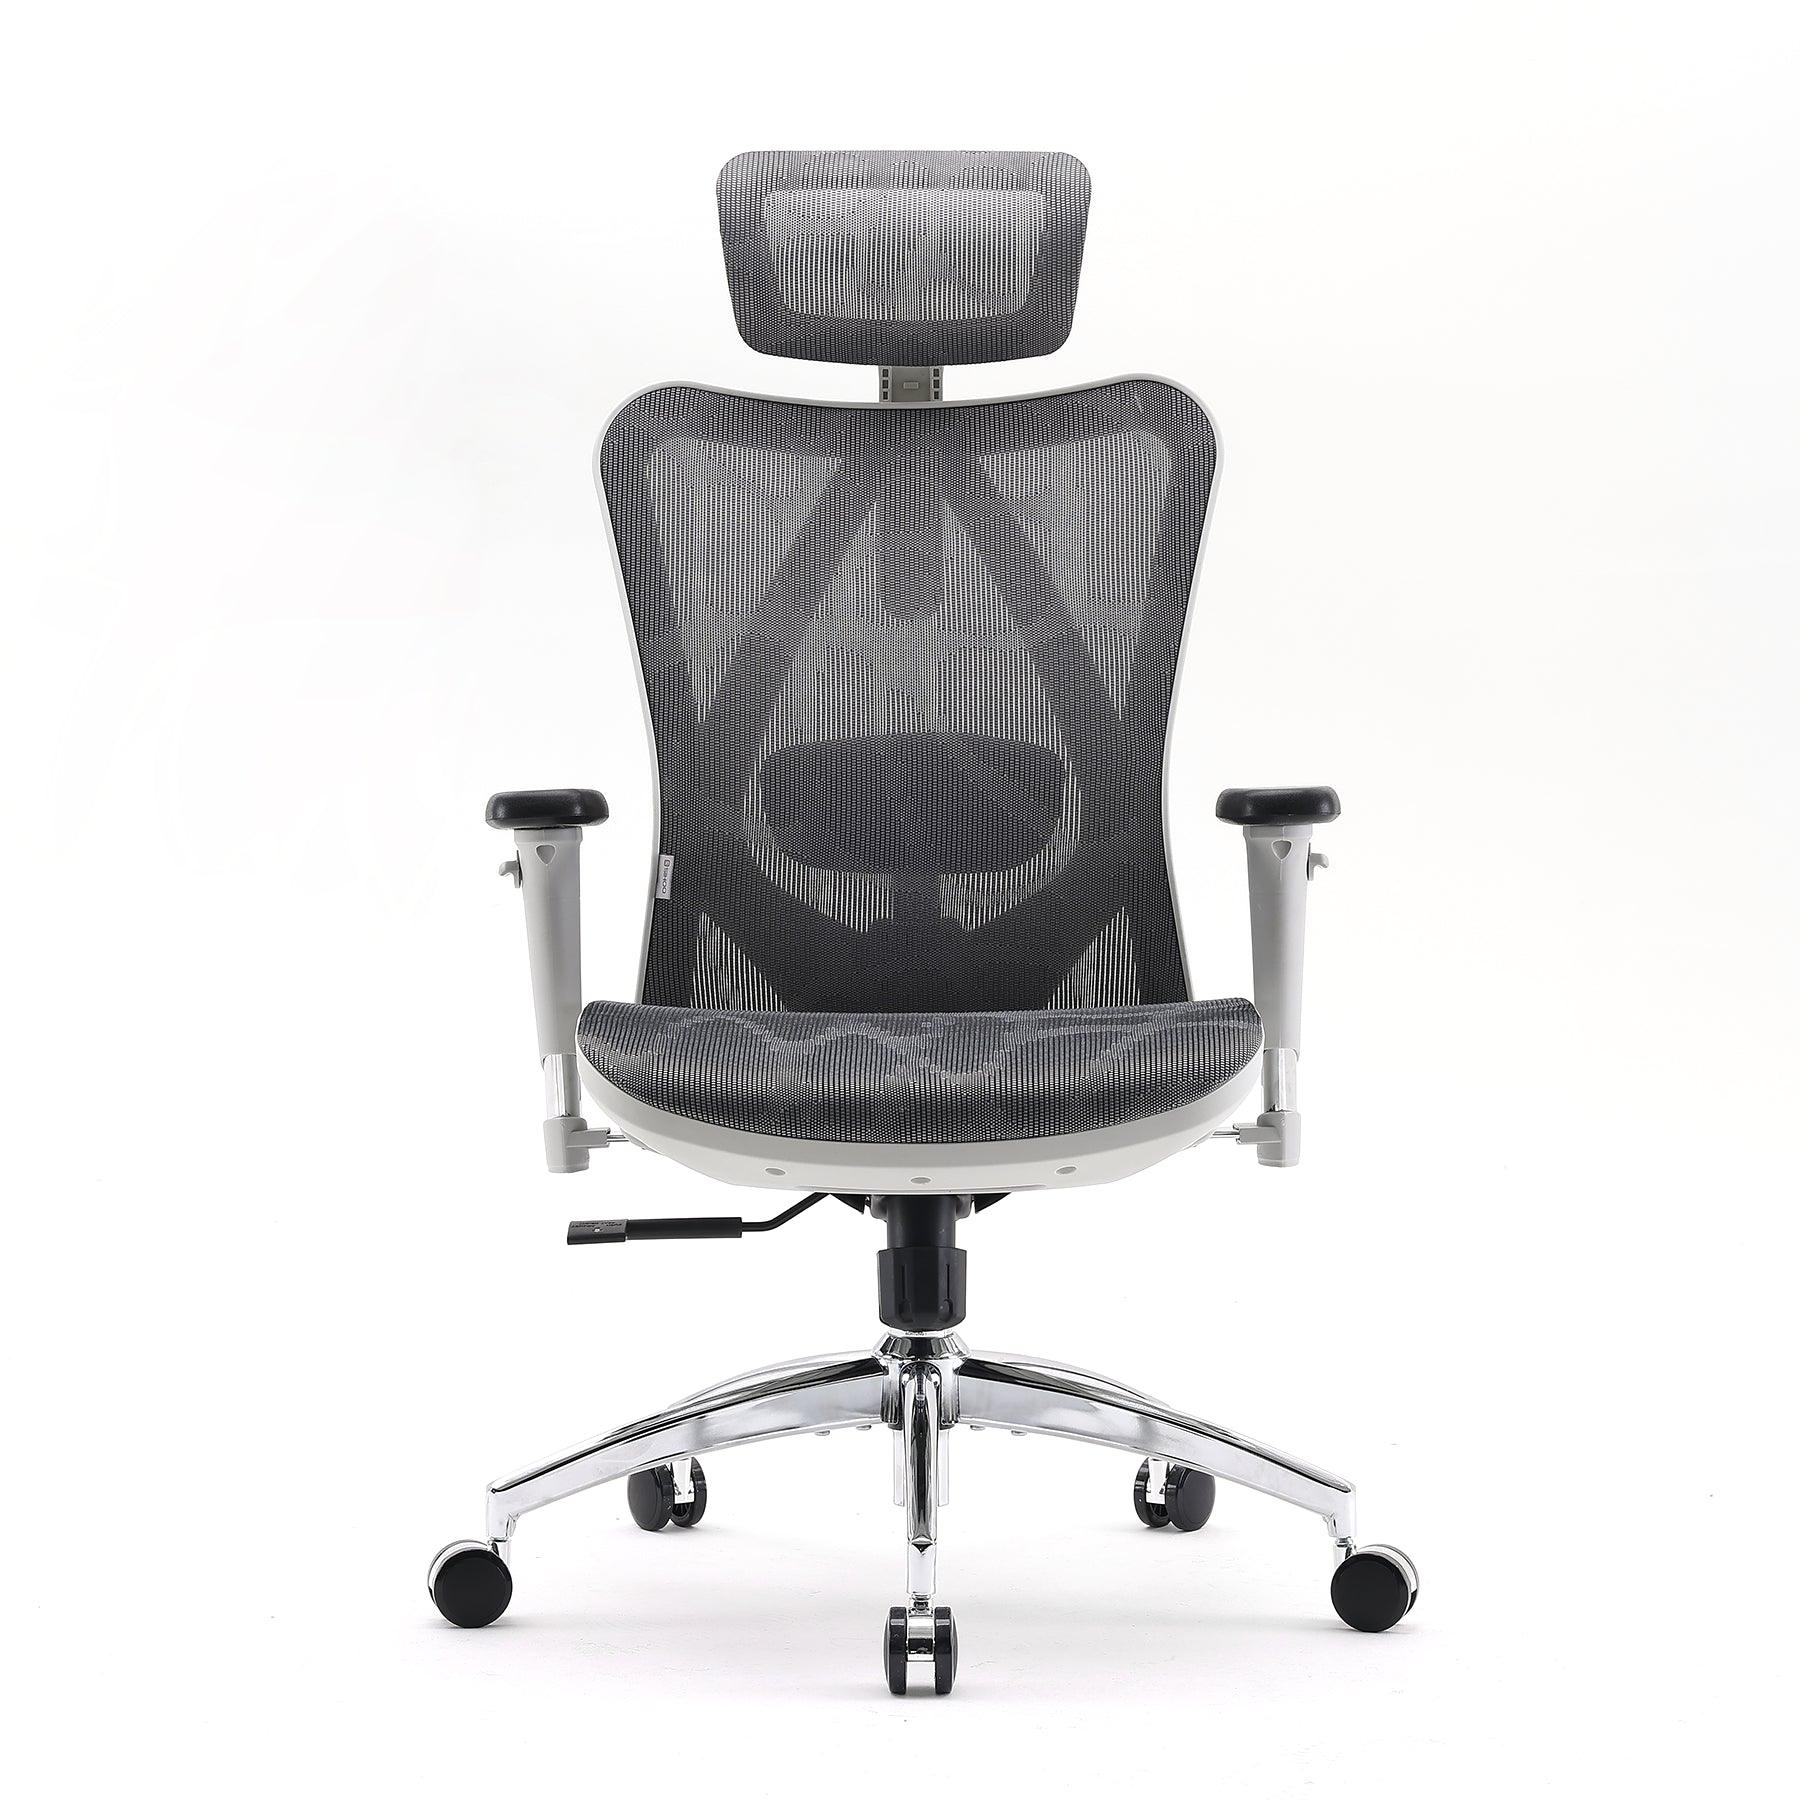 SIHOO M57 Ergonomic Office Chair with 3 Way Armrests Indonesia